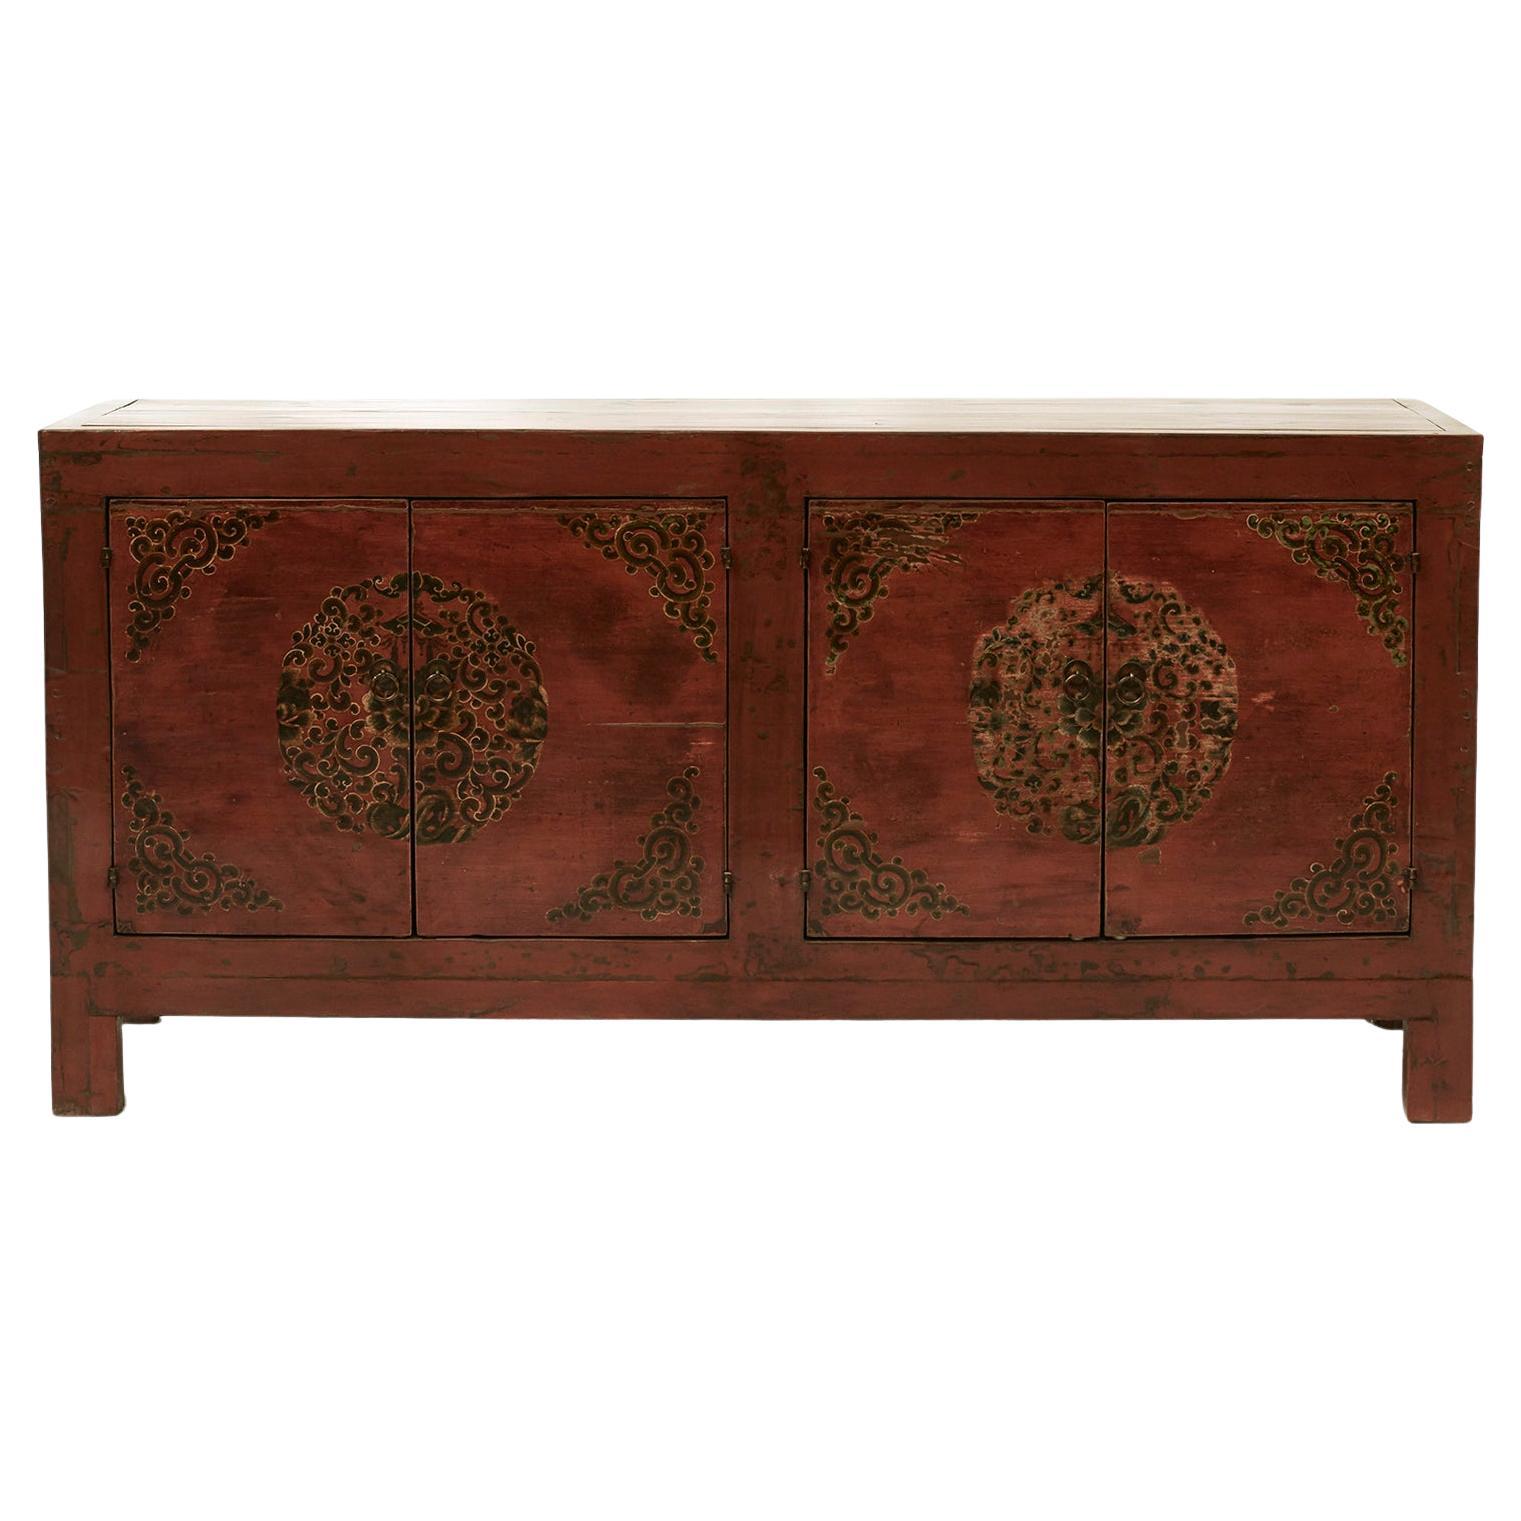 Lacquered Sideboard with Decorations, Shandong Province China